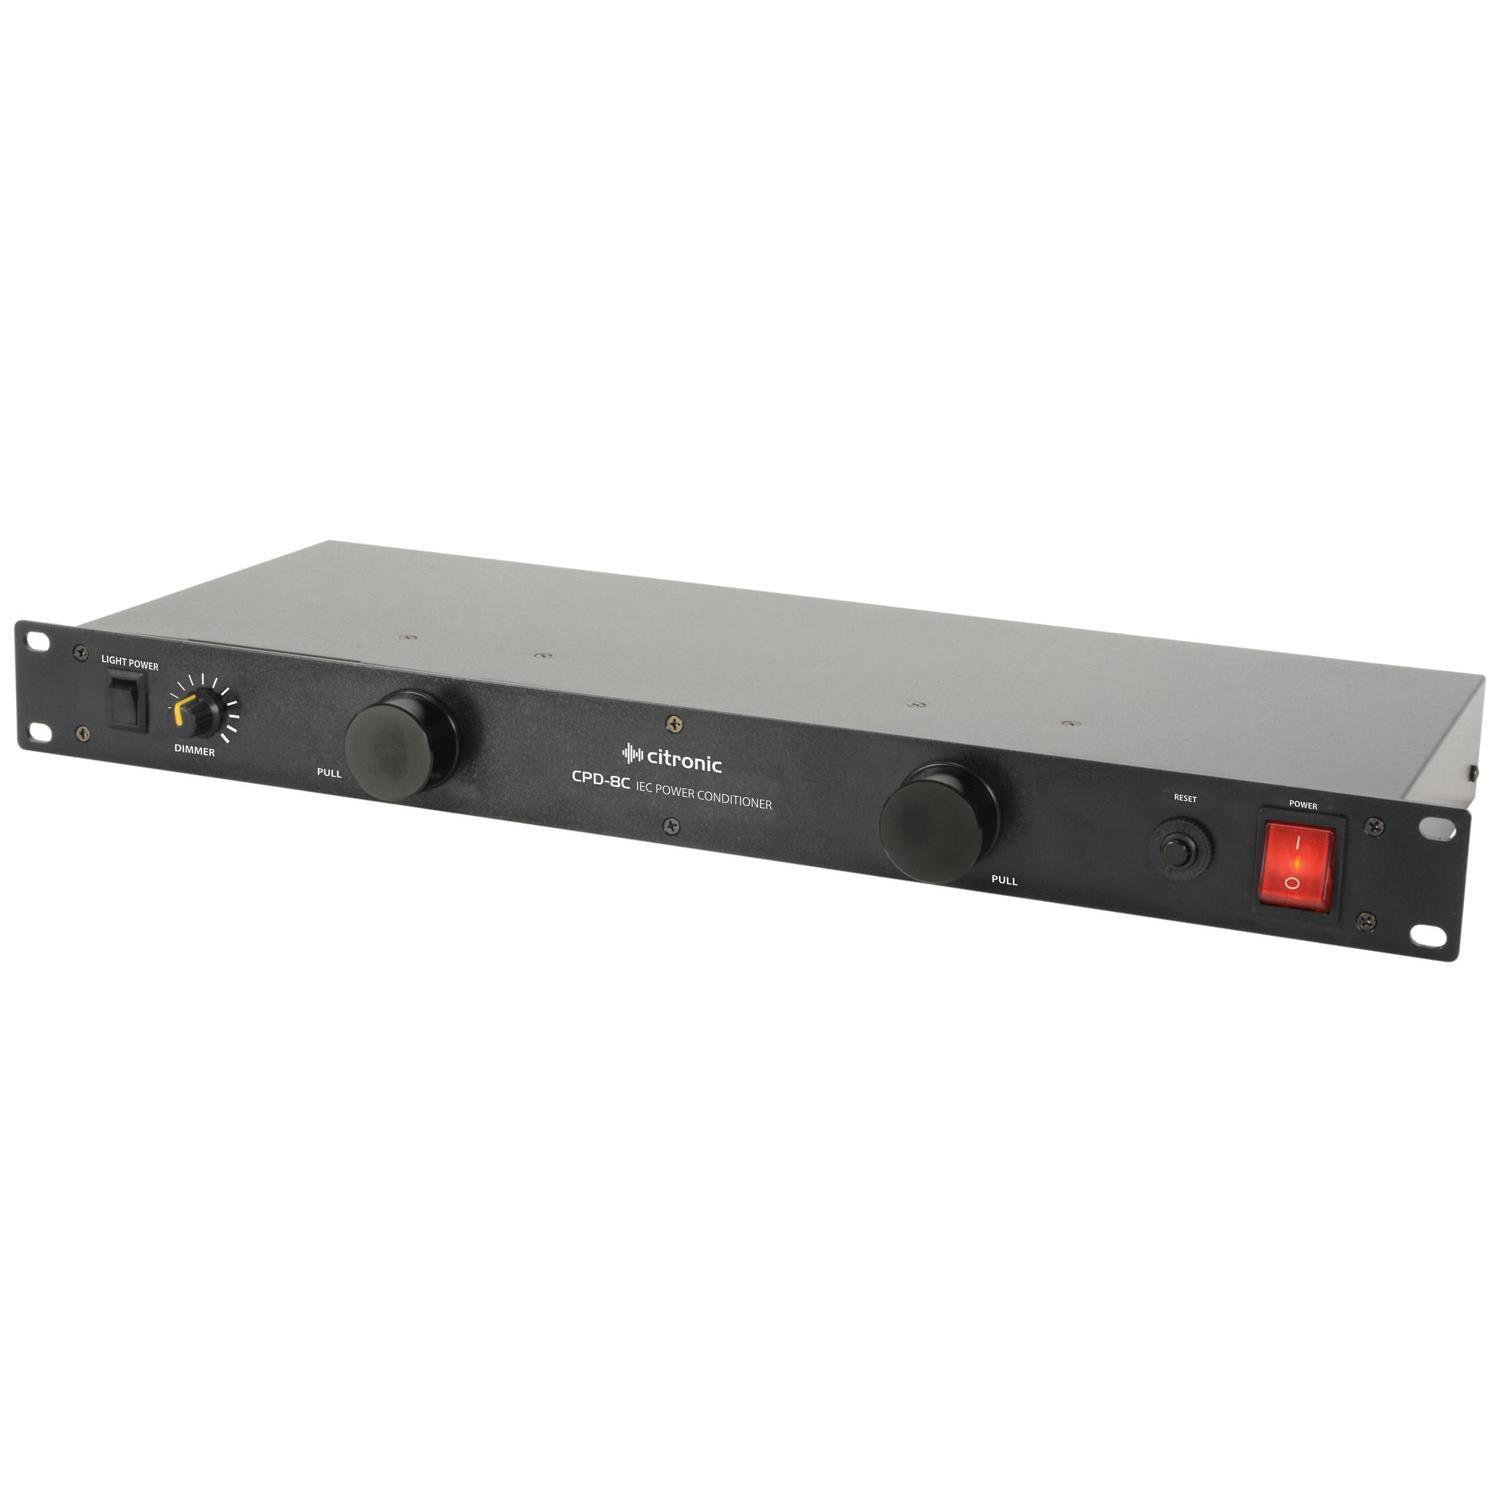 Citronic CPD-8C 8 Way IEC Power Conditioner - DY Pro Audio